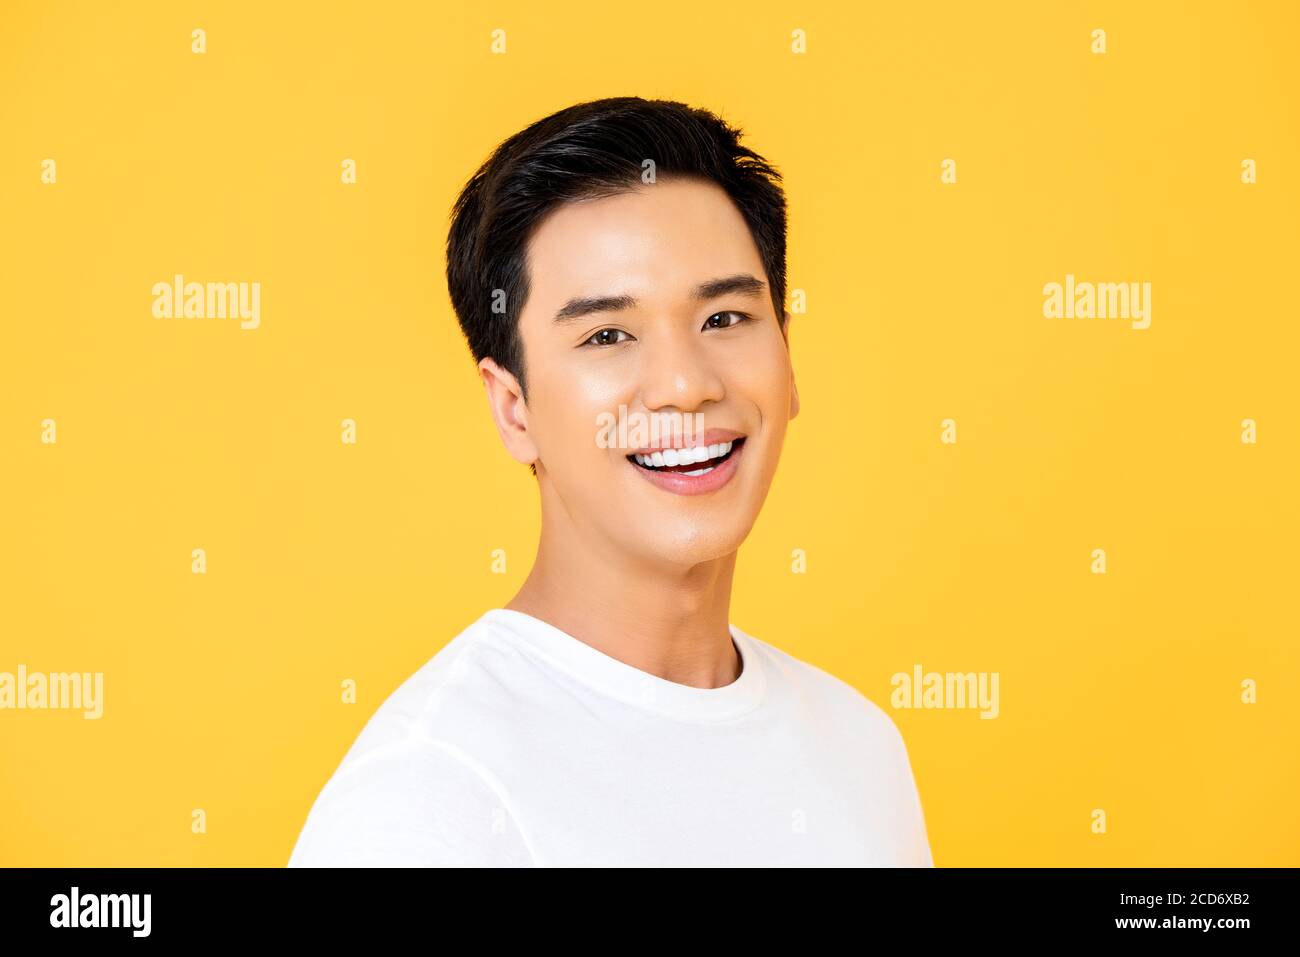 Close up portrait of young handsome Asian man cheerfuly smiling and looking at camera in isolated studio yellow background Stock Photo